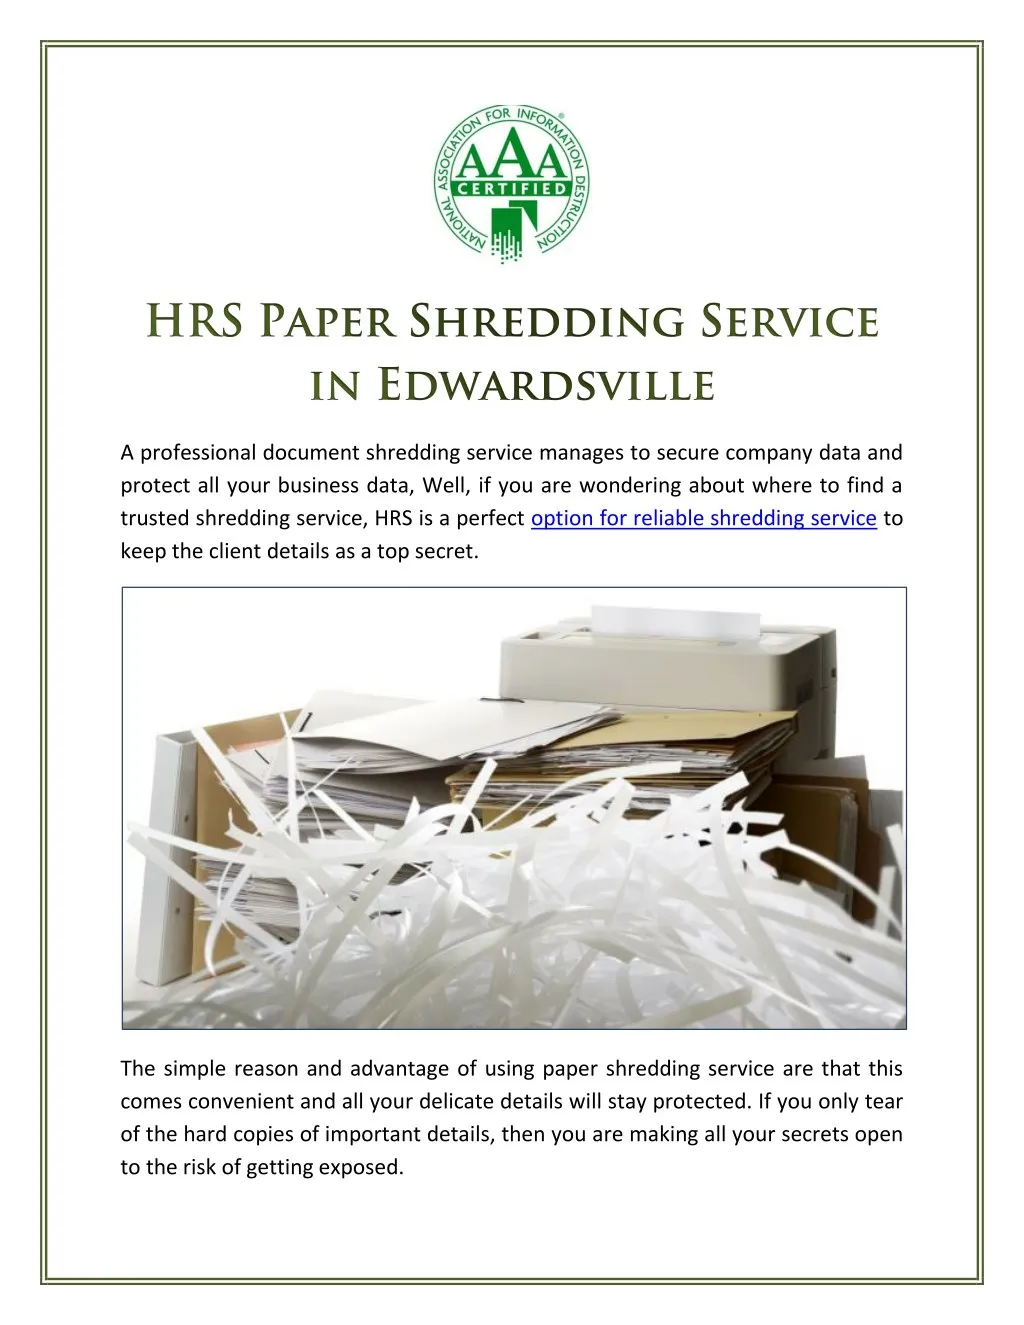 a professional document shredding service manages